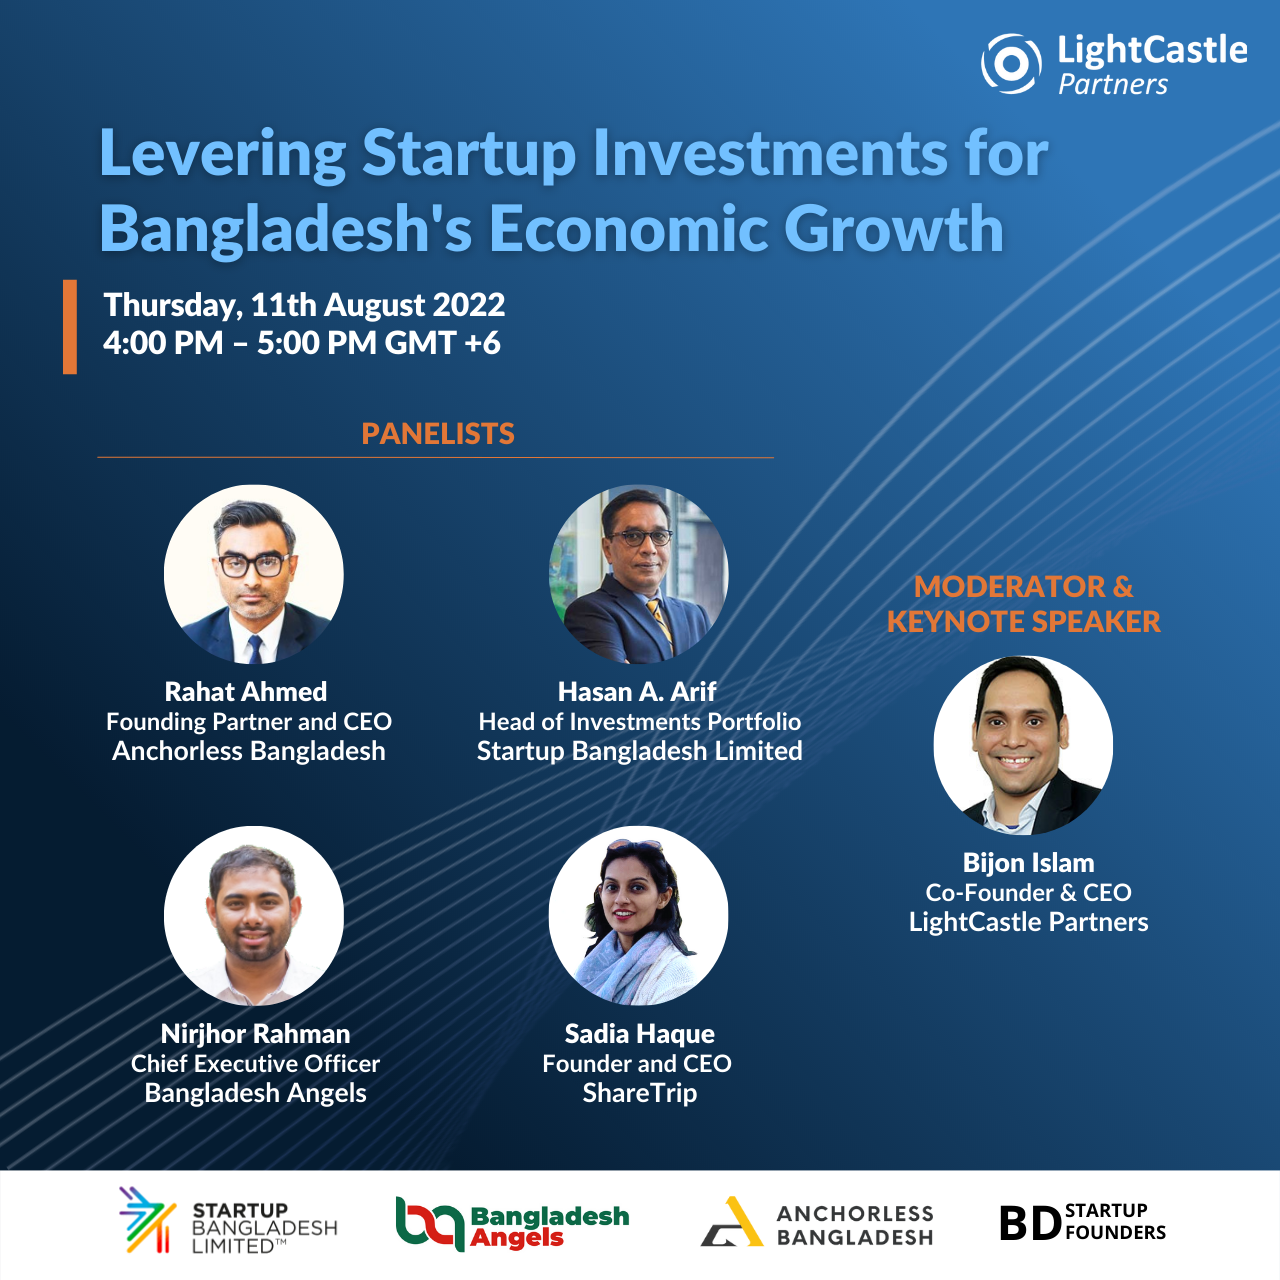 Levering Startup Investments for Bangladesh’s Economic Growth